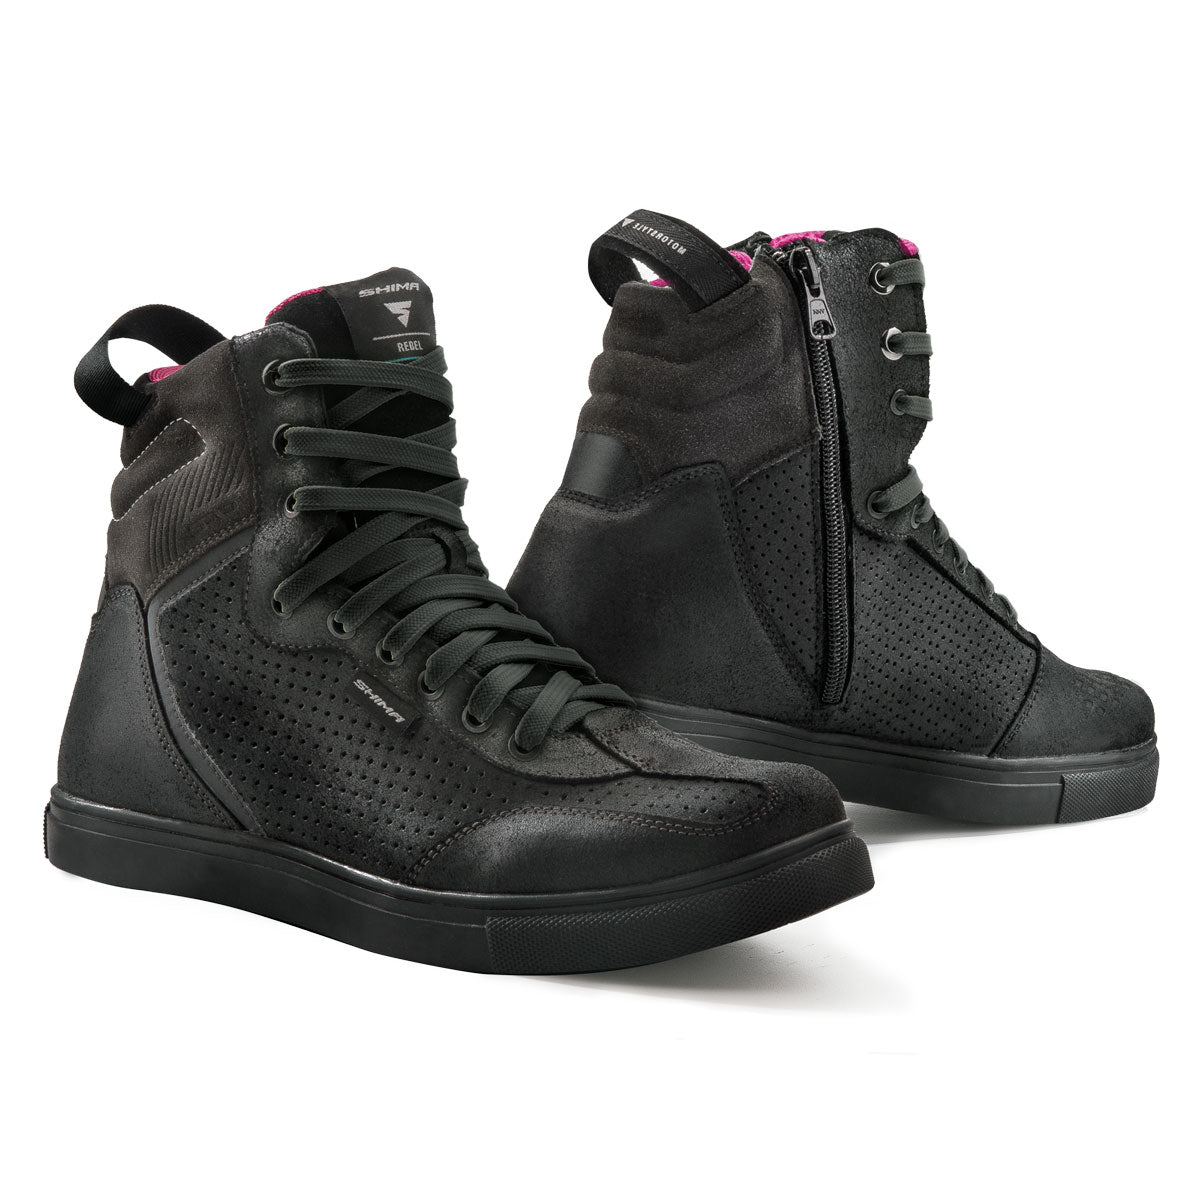 Rebel waterproof motorcycle sneakers with black laces from Shima 